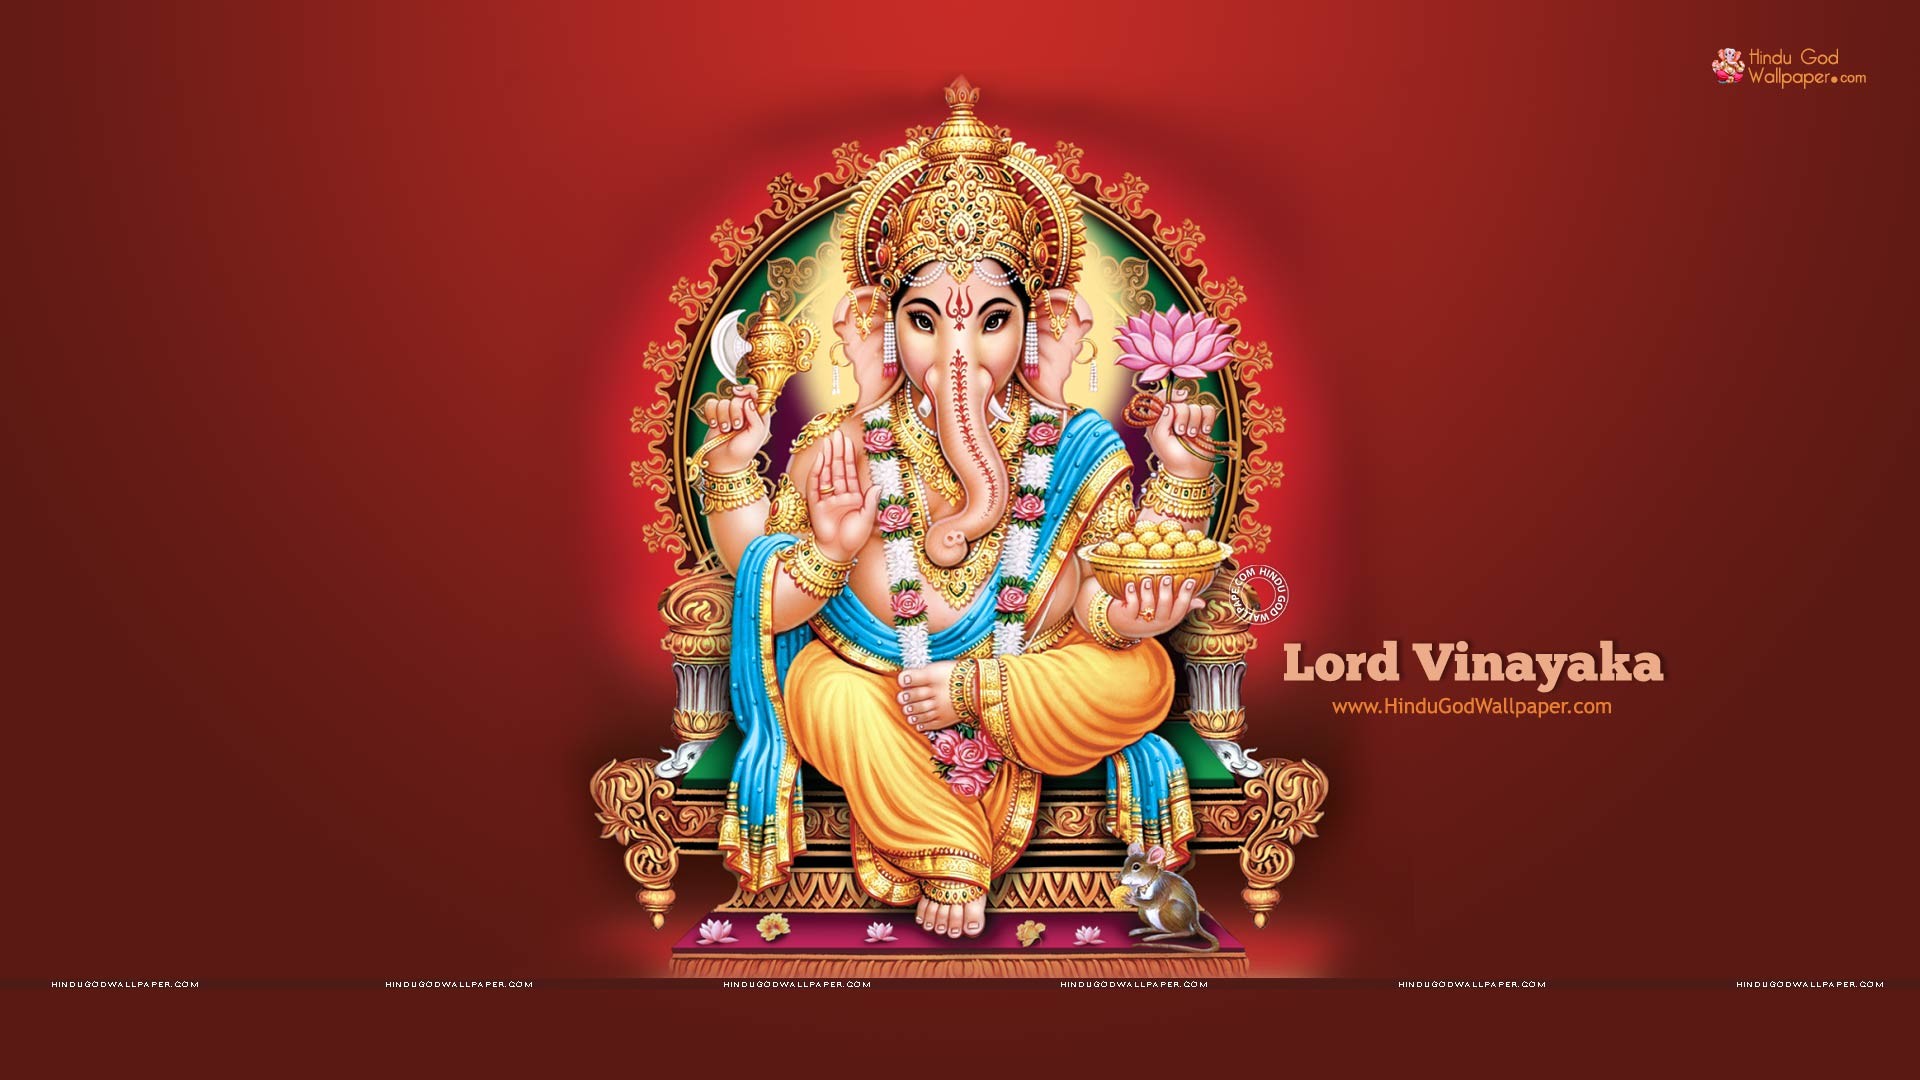 Model No - 1117 Ganesh Ji Wallpaper ( 12x15 size ) Photographic Paper -  Religious posters in India - Buy art, film, design, movie, music, nature  and educational paintings/wallpapers at Flipkart.com